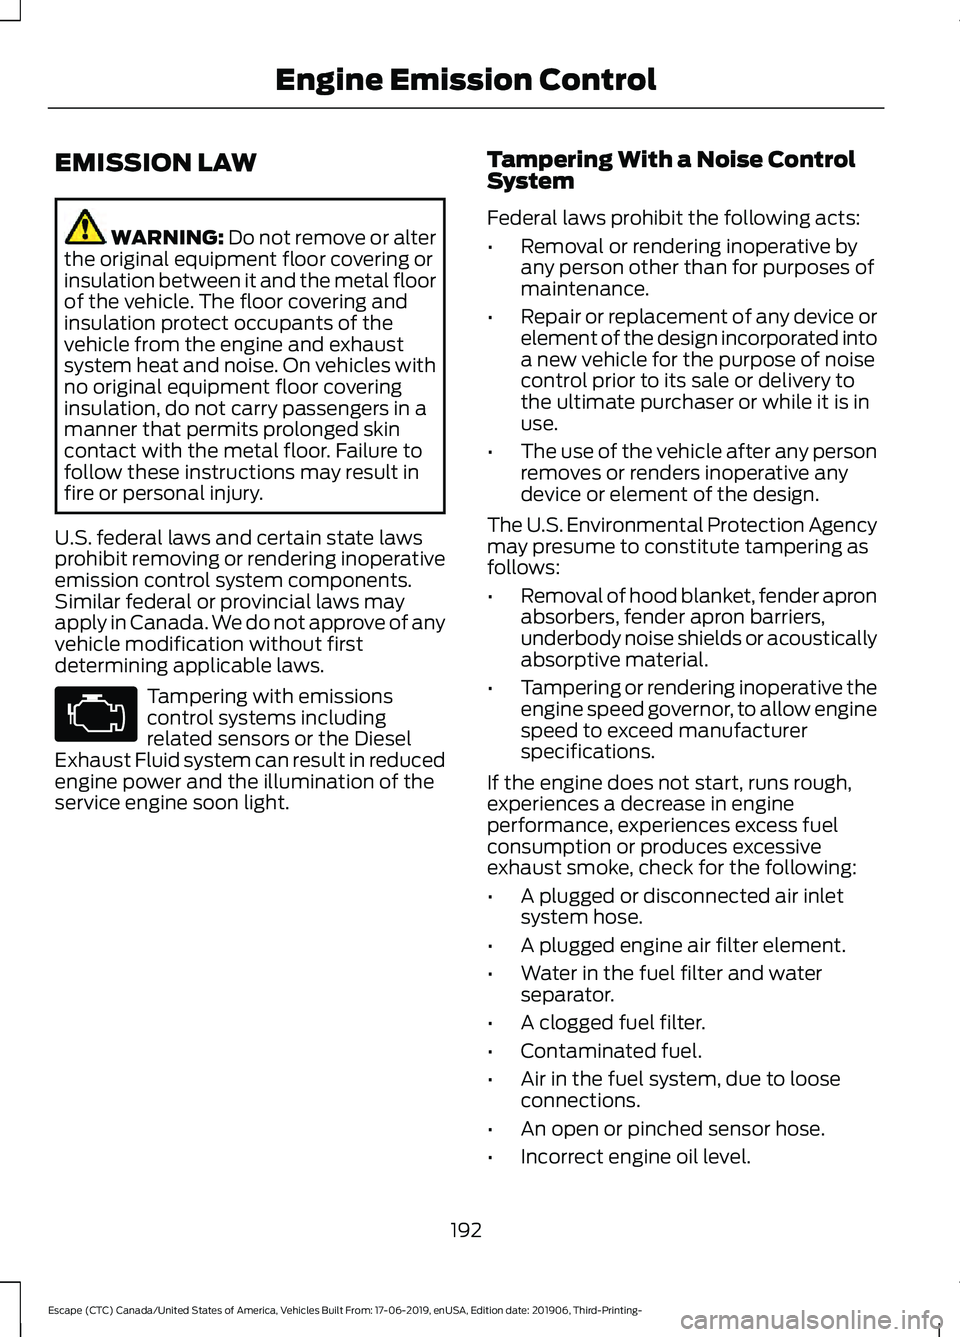 FORD ESCAPE 2020  Owners Manual EMISSION LAW
WARNING: Do not remove or alter
the original equipment floor covering or
insulation between it and the metal floor
of the vehicle. The floor covering and
insulation protect occupants of t